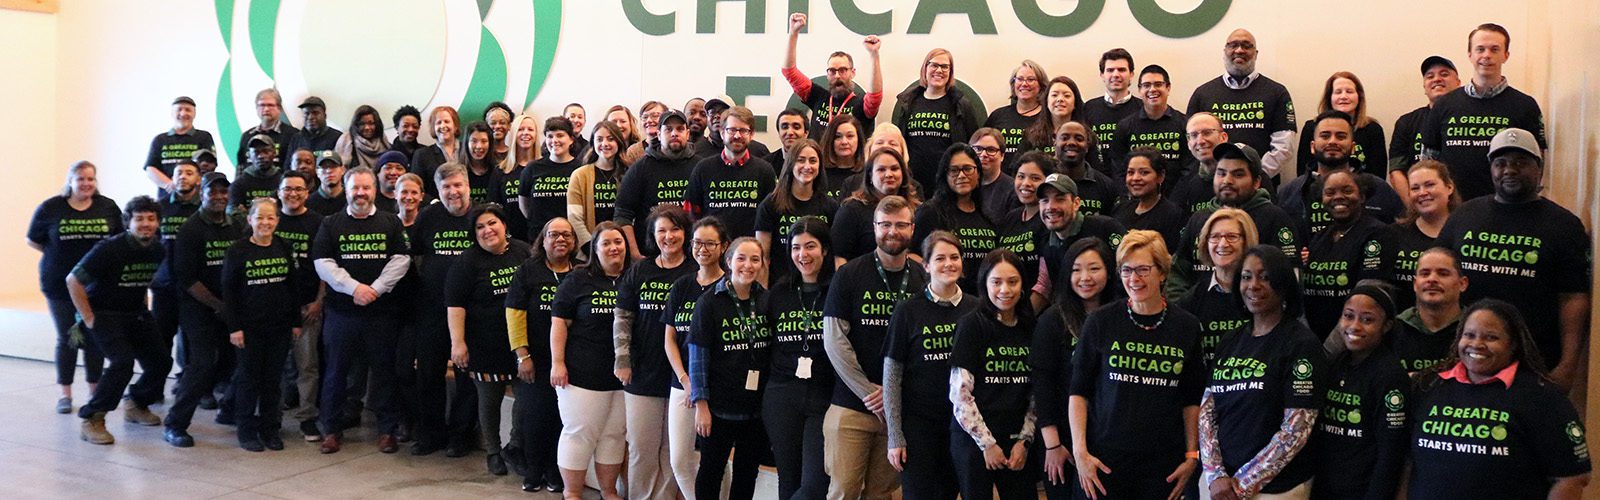 Group photo of Food Depository staff